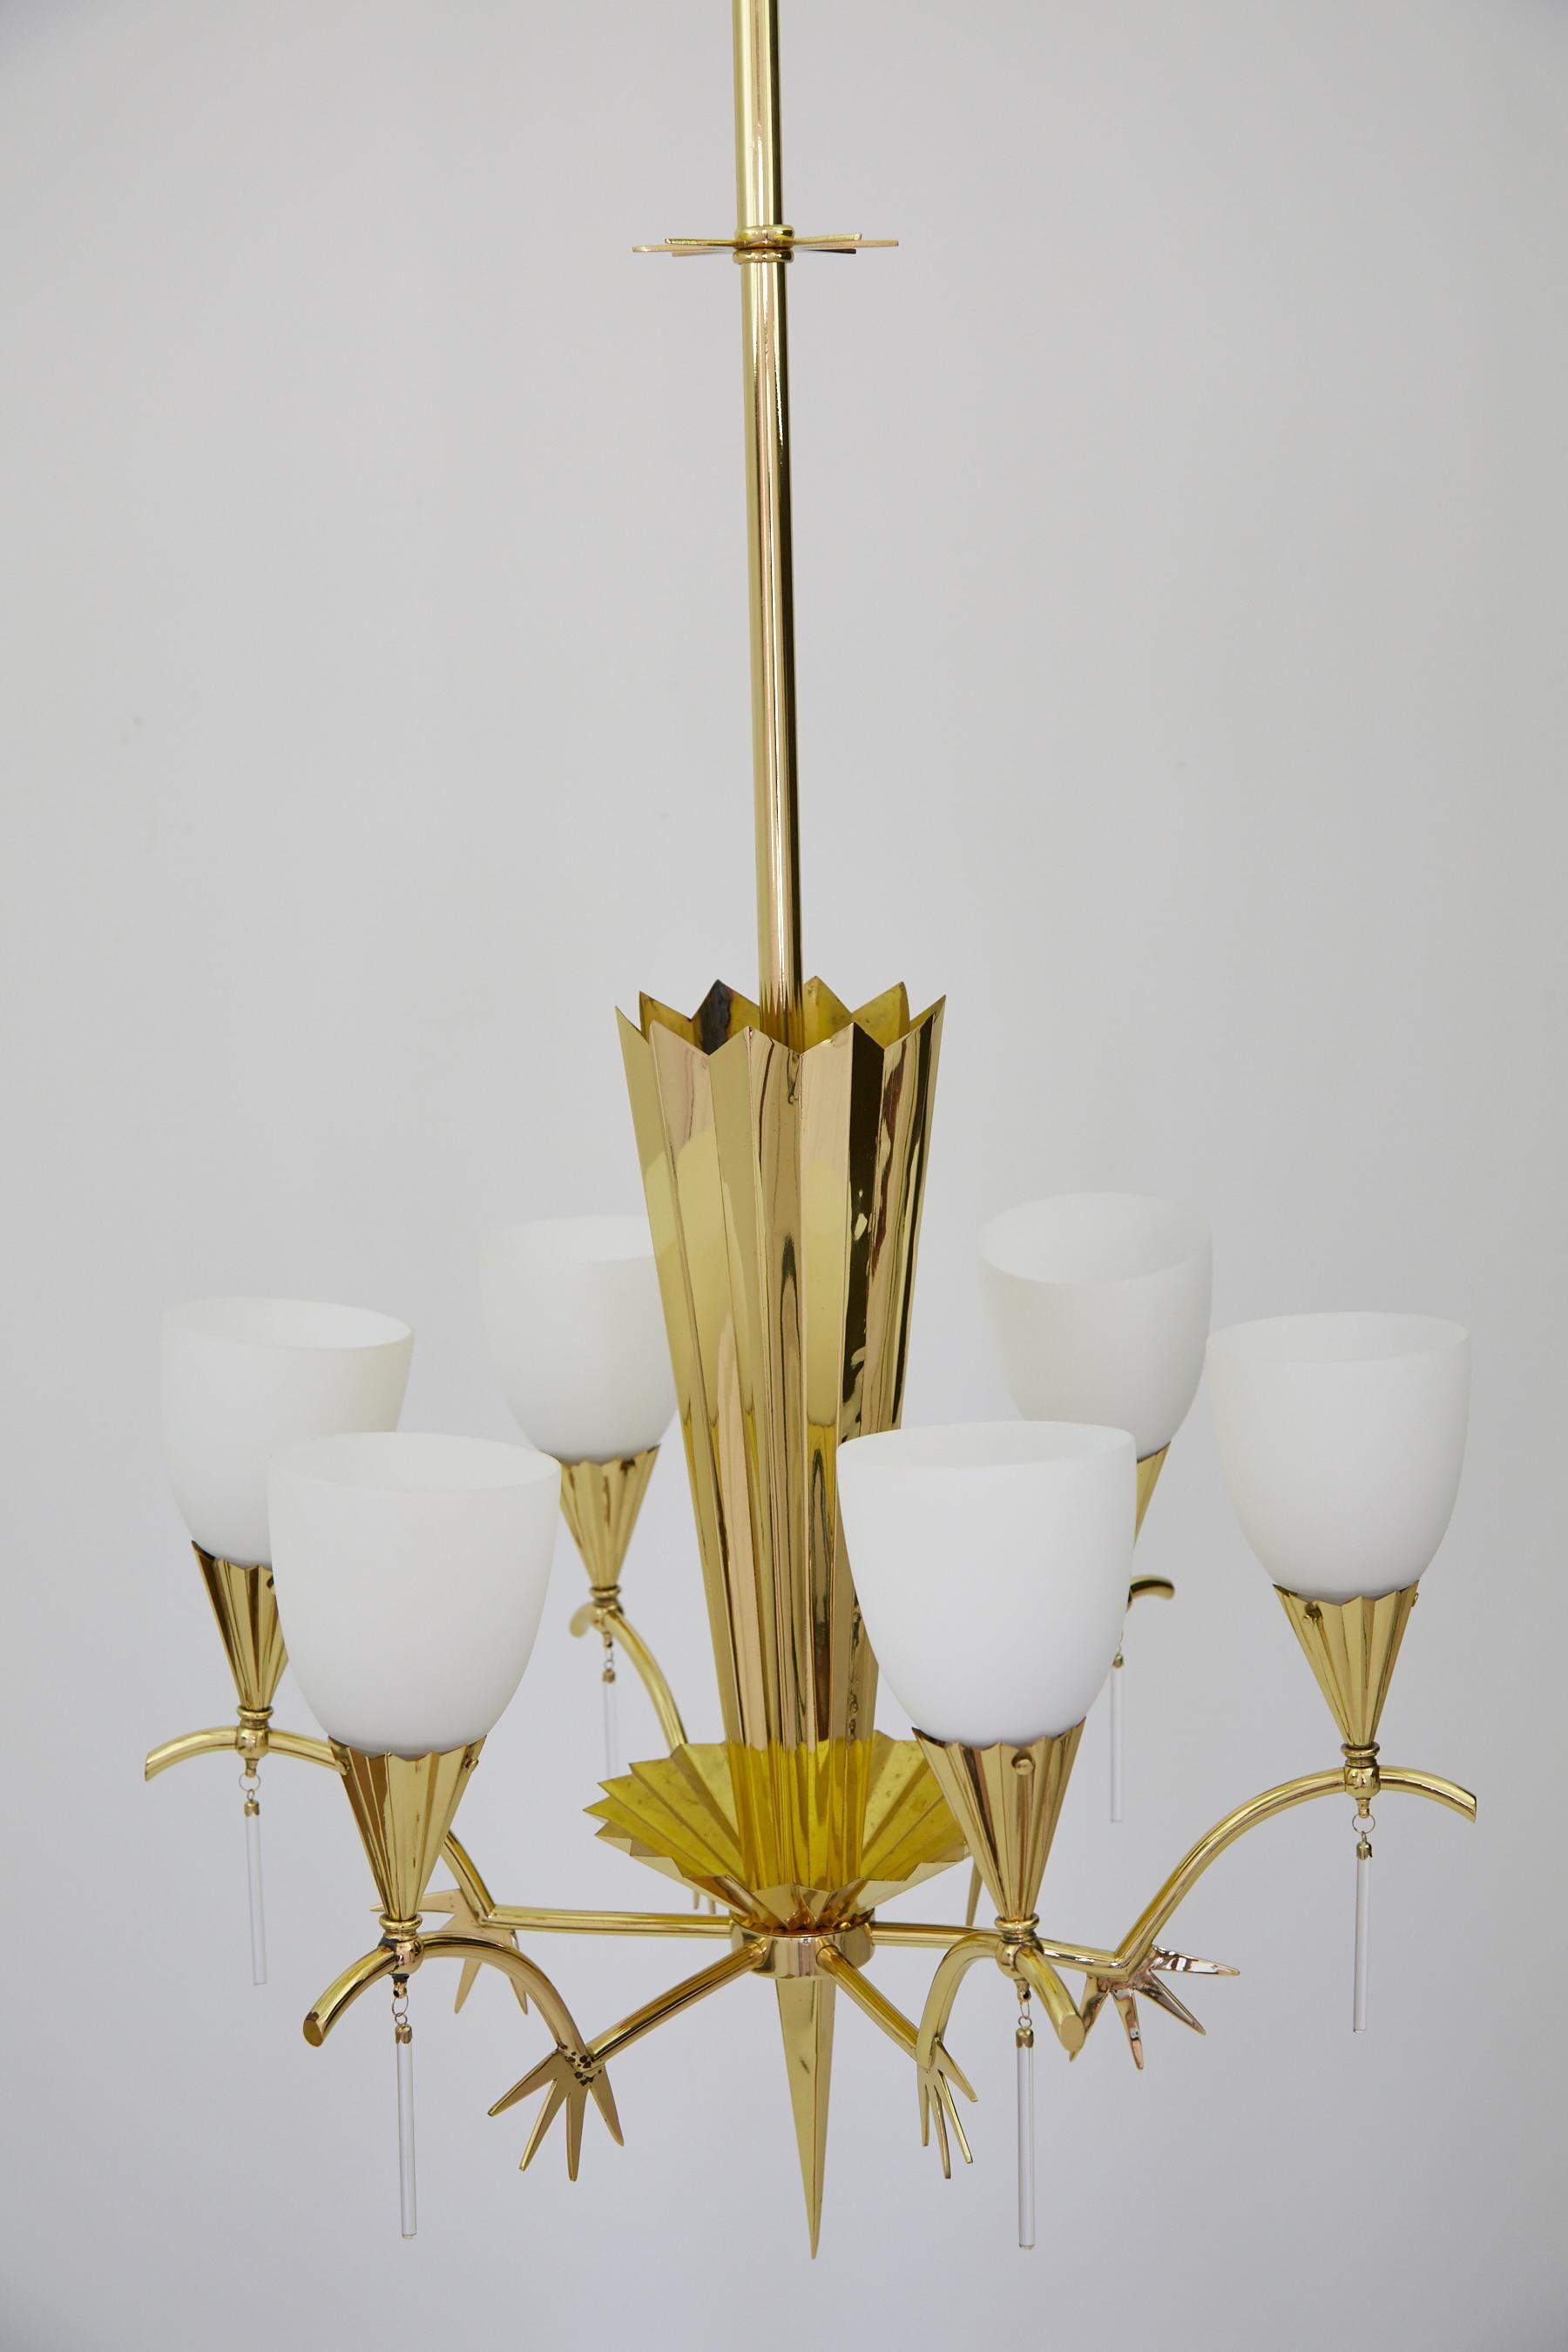 Six-Arm Italian Brass Chandelier with Decorative Spikes, 1940s For Sale 12